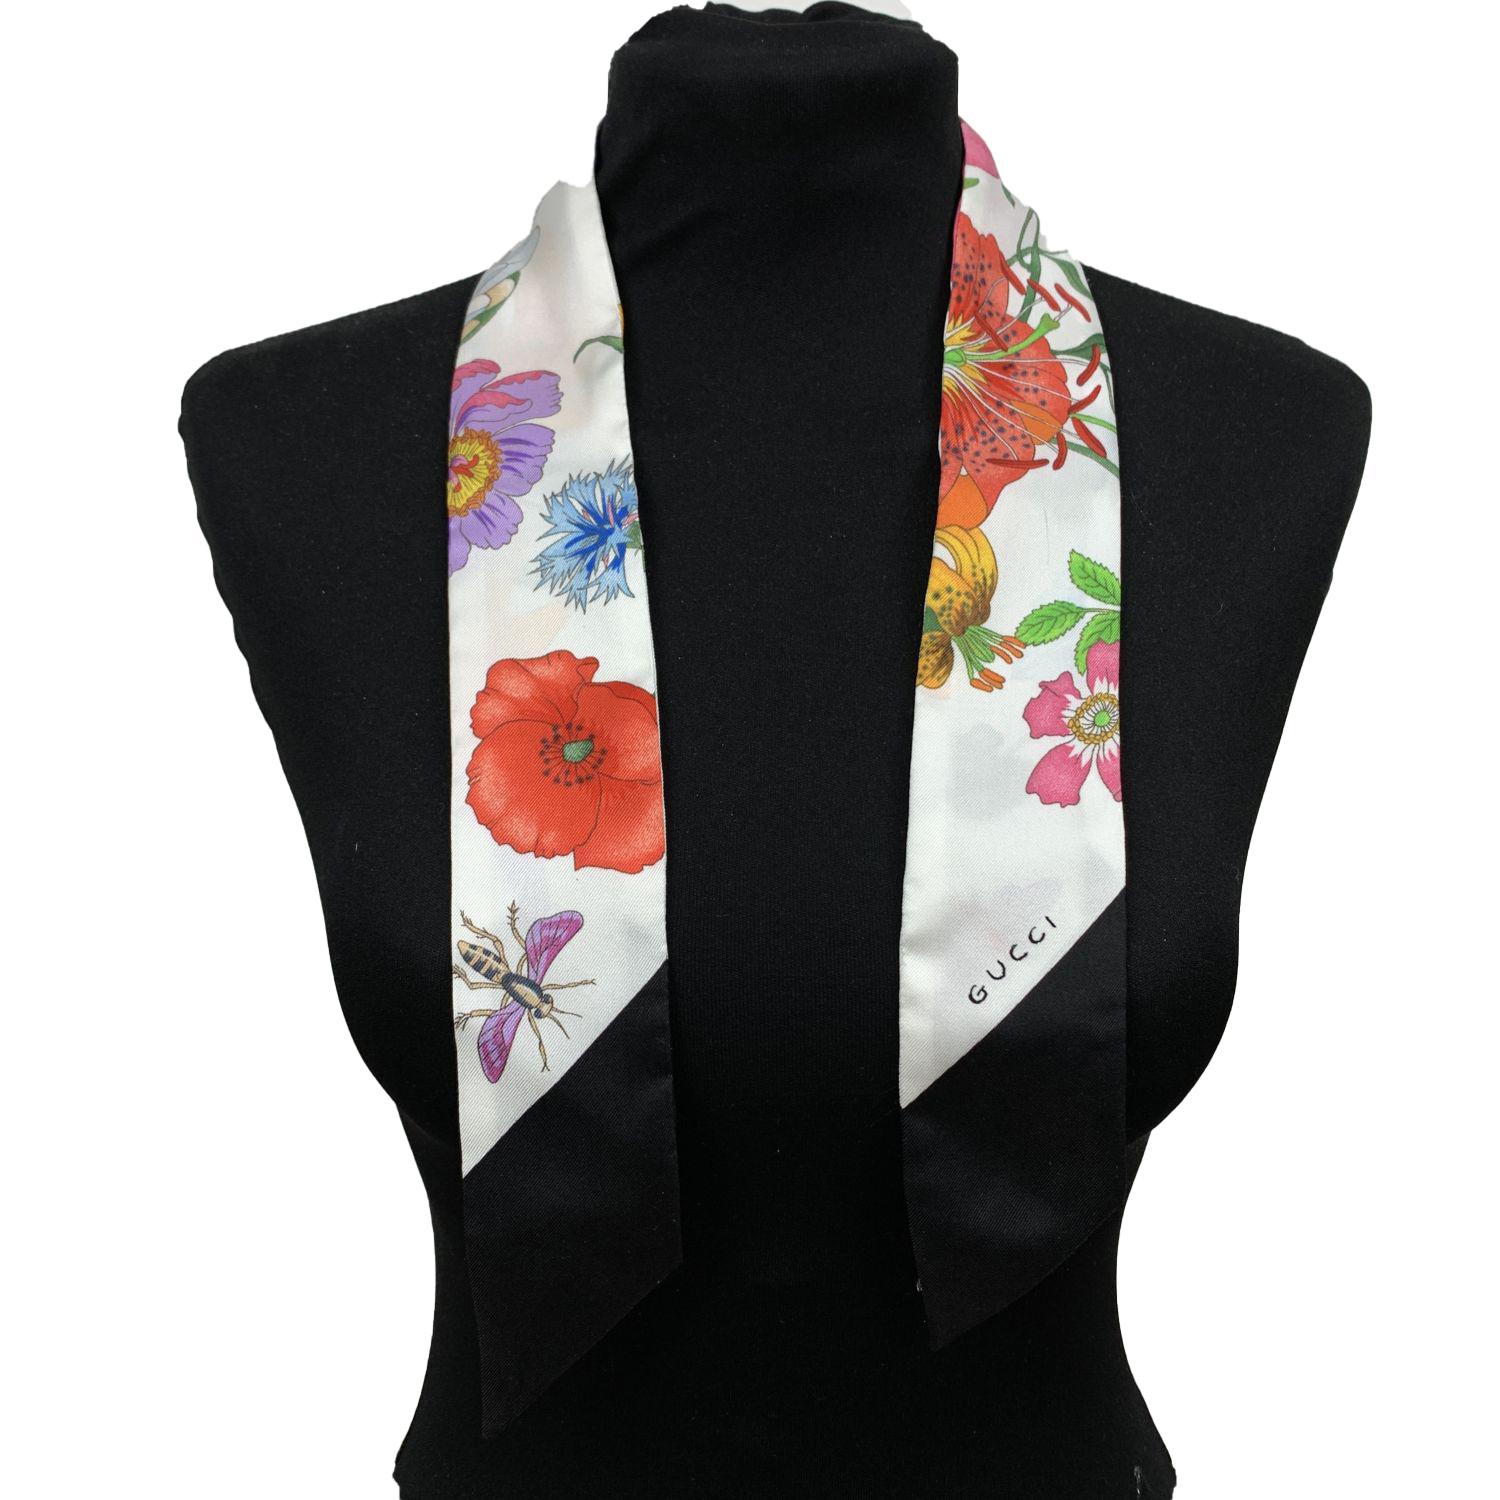 Gucci Silk Flora Twilly scarf. Multicolor floral design on white background. Black borders. Composition: 100% Silk. Total length: 33.5 inches - 85 cm. Width: 2 inches - 5,2 cm

Details

MATERIAL: Silk

COLOR: Multicolor

MODEL: Flora Twilly

GENDER: